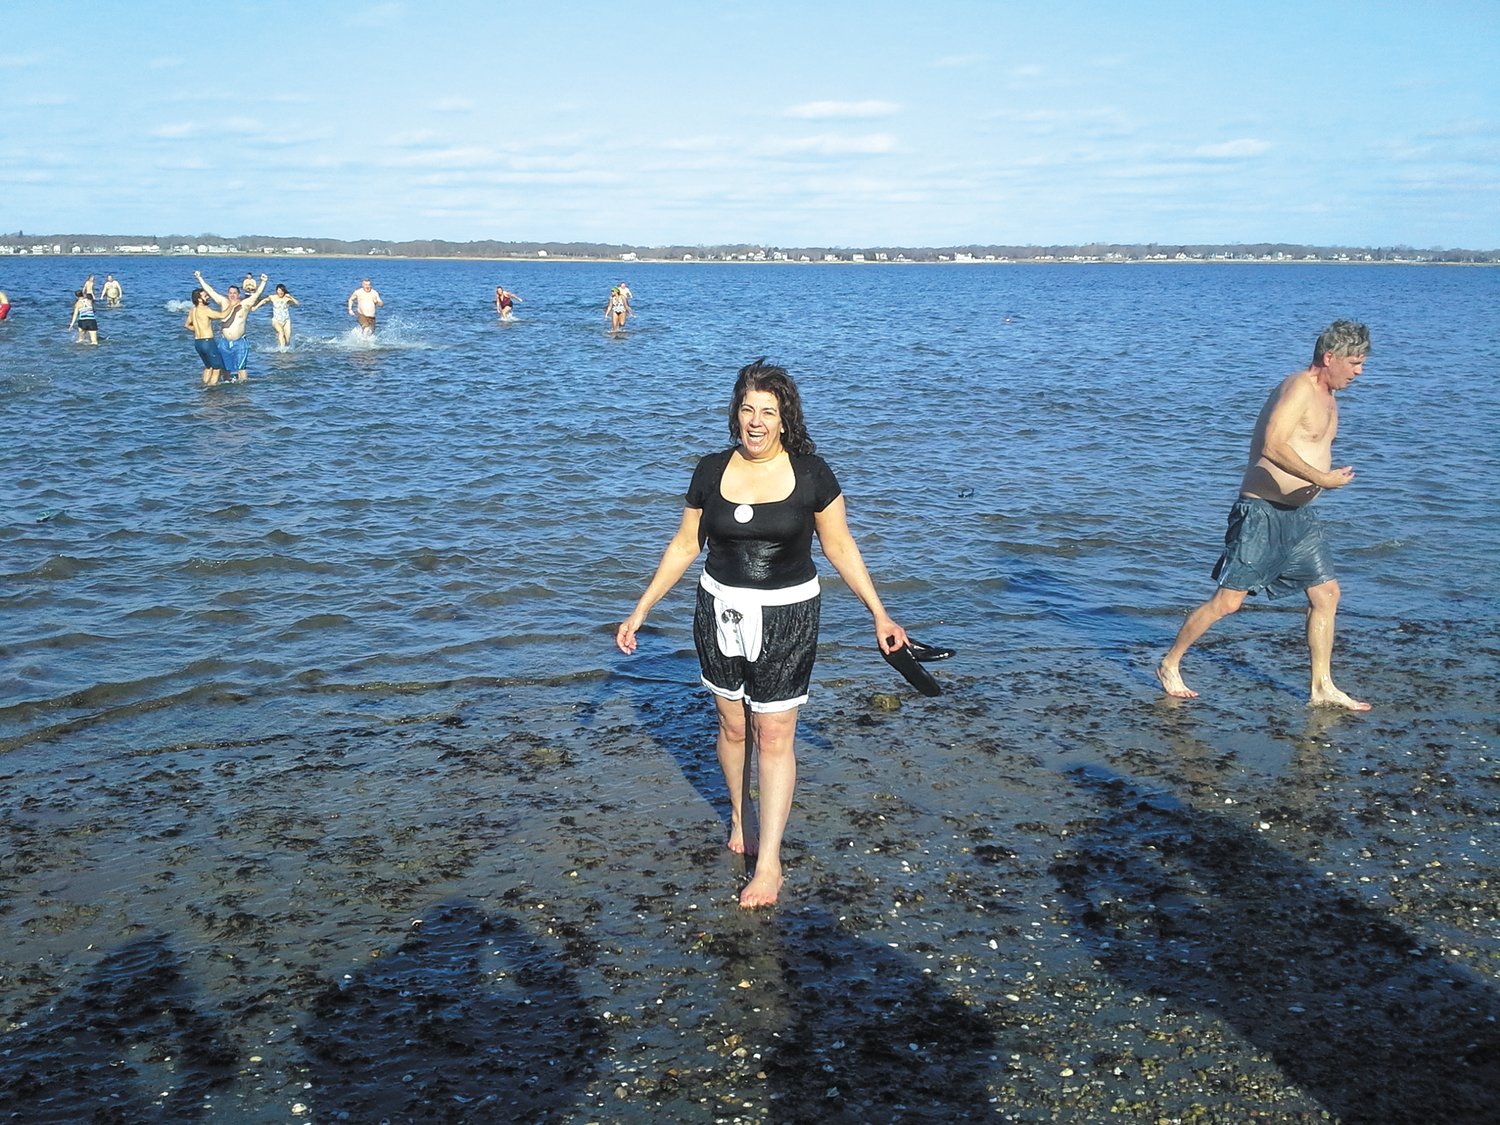 ALL FOR THE CAUSE: Program coordinator at Mentor RI, Pam Sherman, following a dip in Greenwich Bay during the annual Frozen Clam Dip. Pam, who worked for the agency for 23 years died this fall. (Submitted photo)